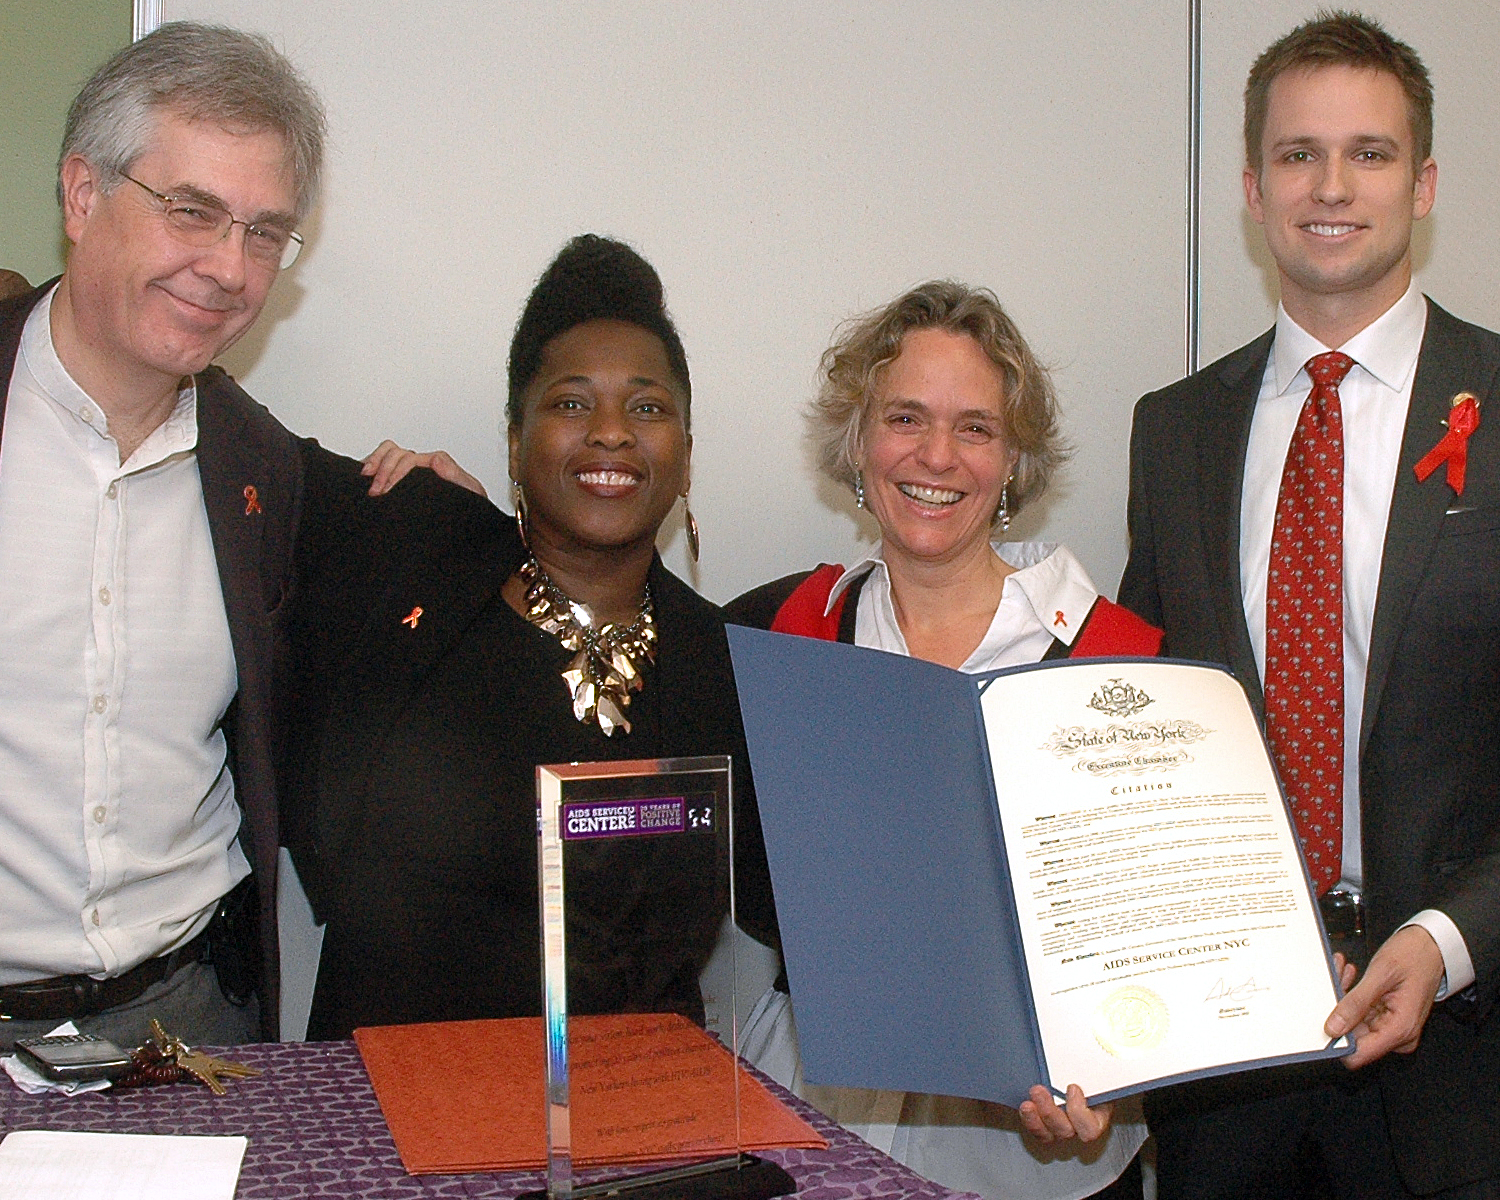 Presentation of a Citation signed by Governor Cuomo: Kim Atkins, Brenda Starks-Ross, Sharen Duke and Eric Bottcher, Special Assistant for Community Affairs S(New York State Cabinet Level Position) 